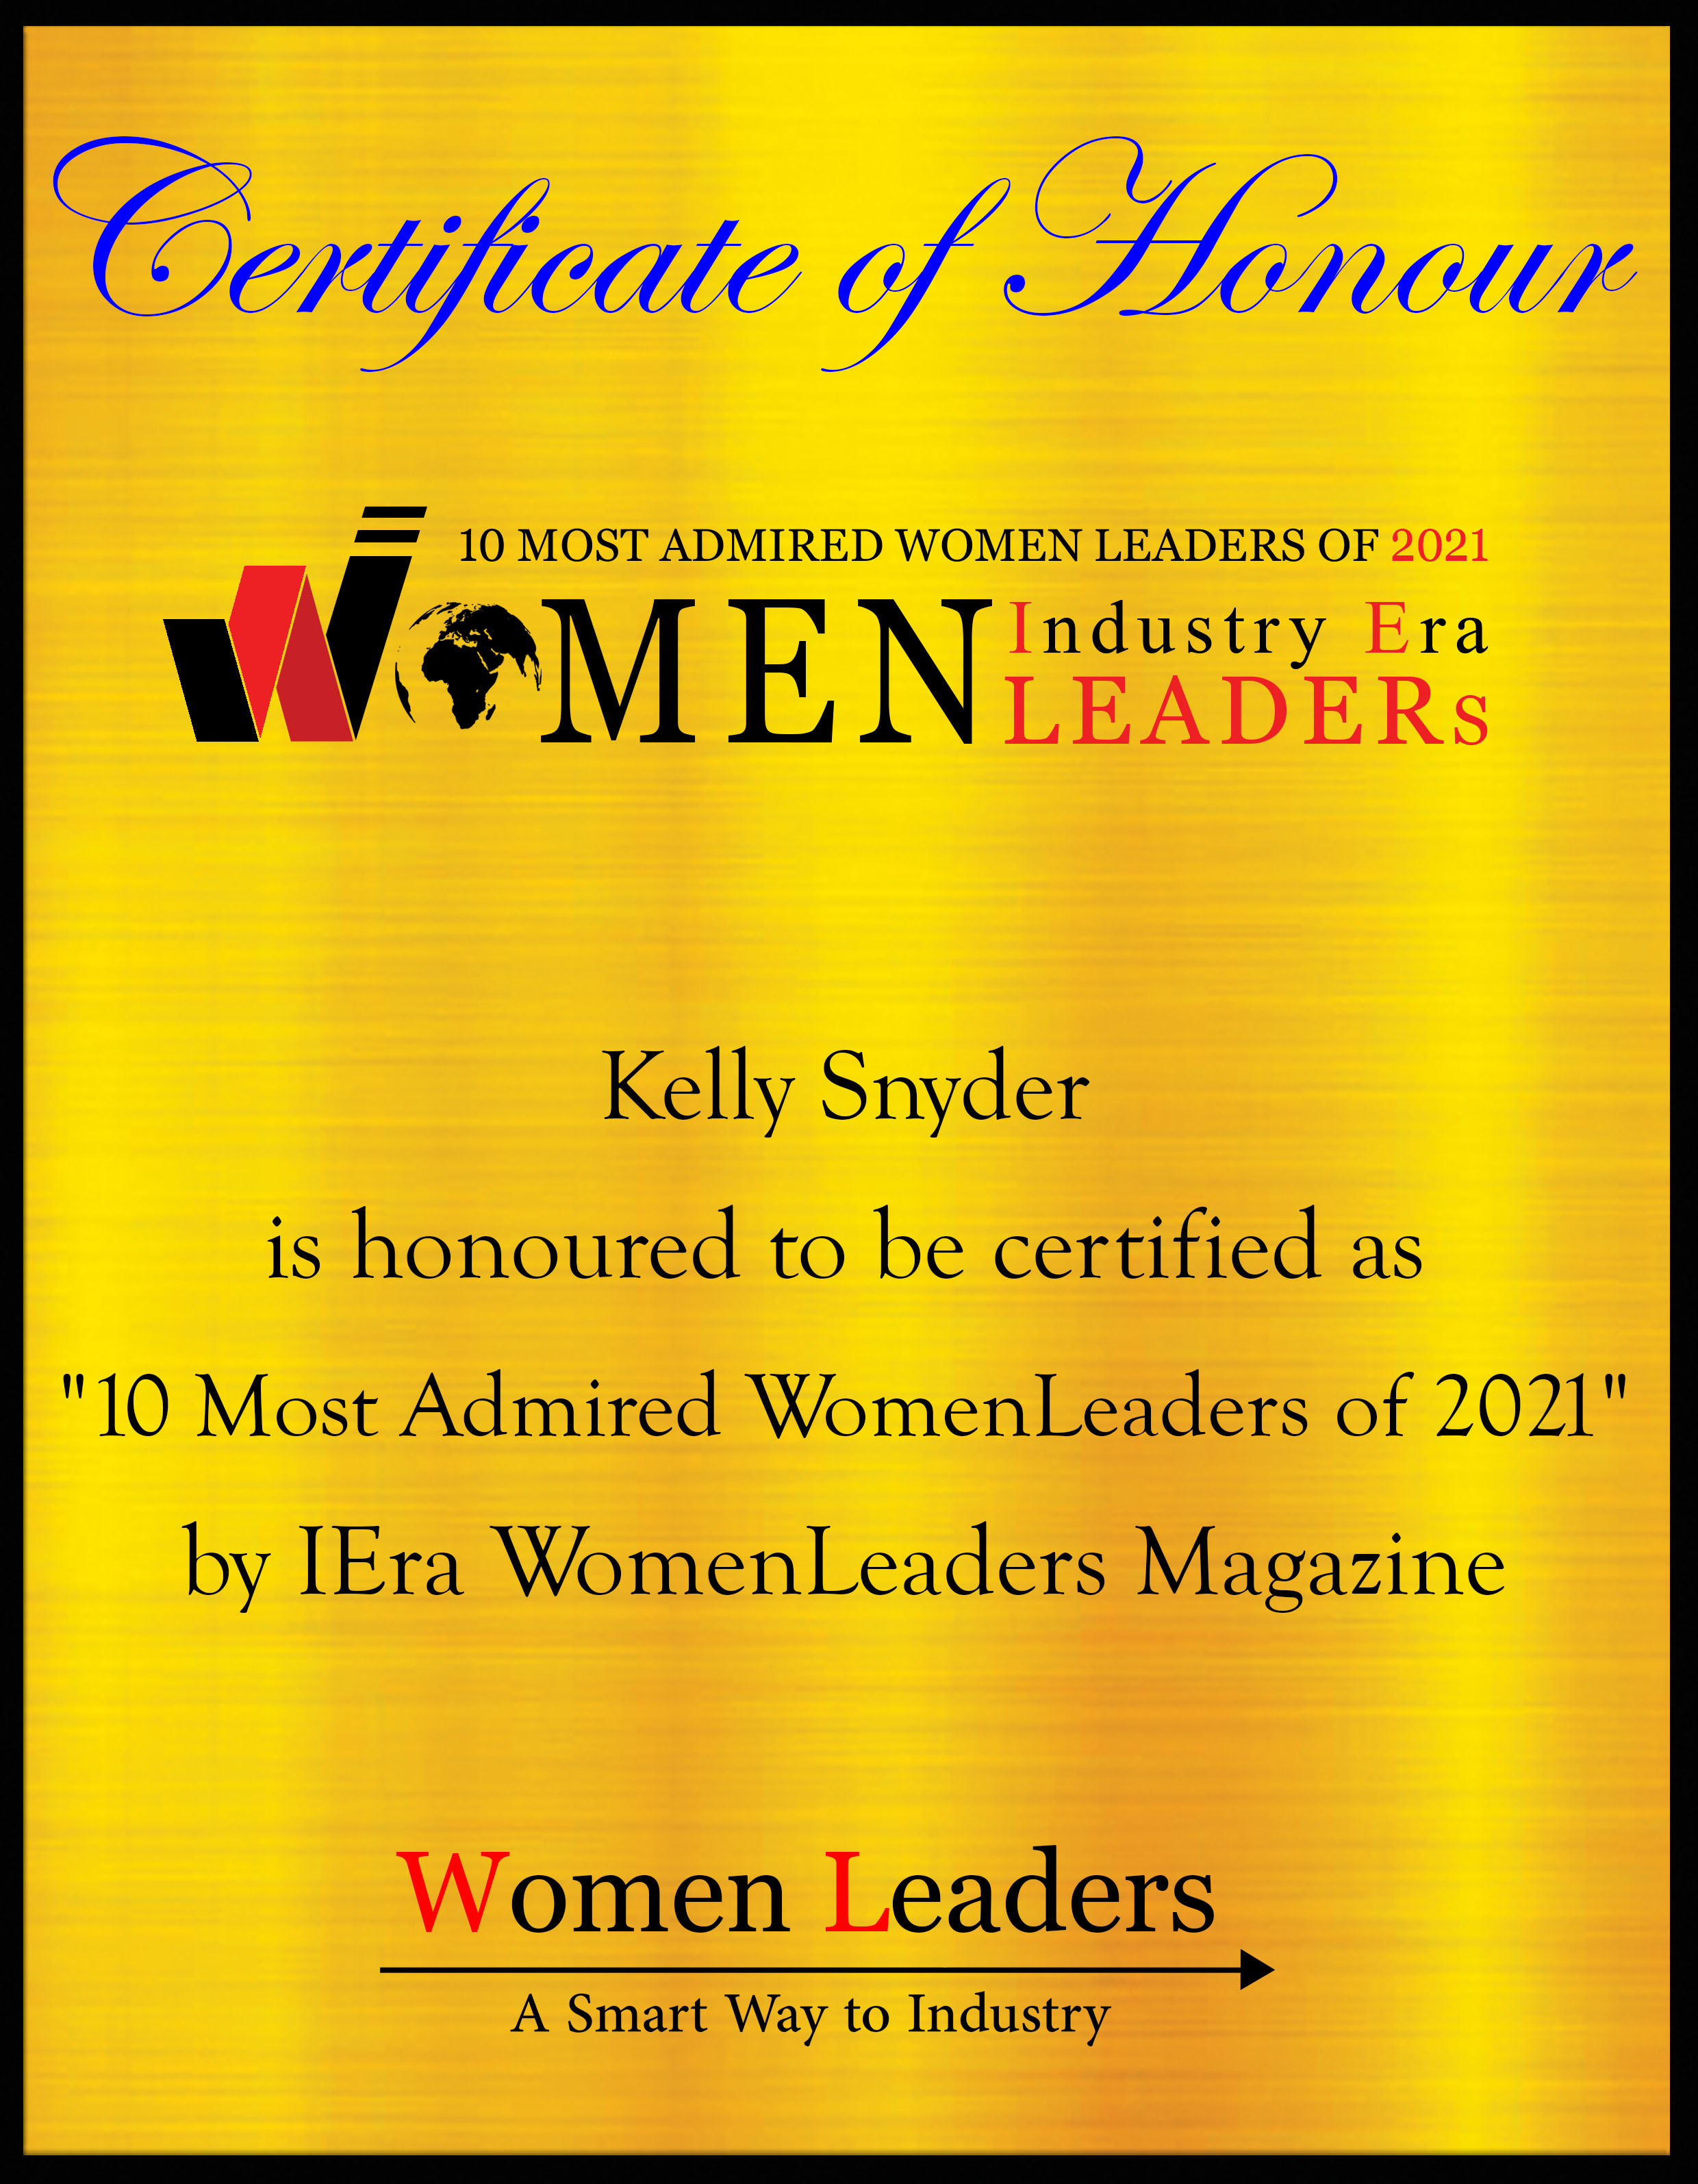 Kelly Snyder, Senior Director Origination - North America at EDP Renewables, Most Admired WomenLeaders of 2021